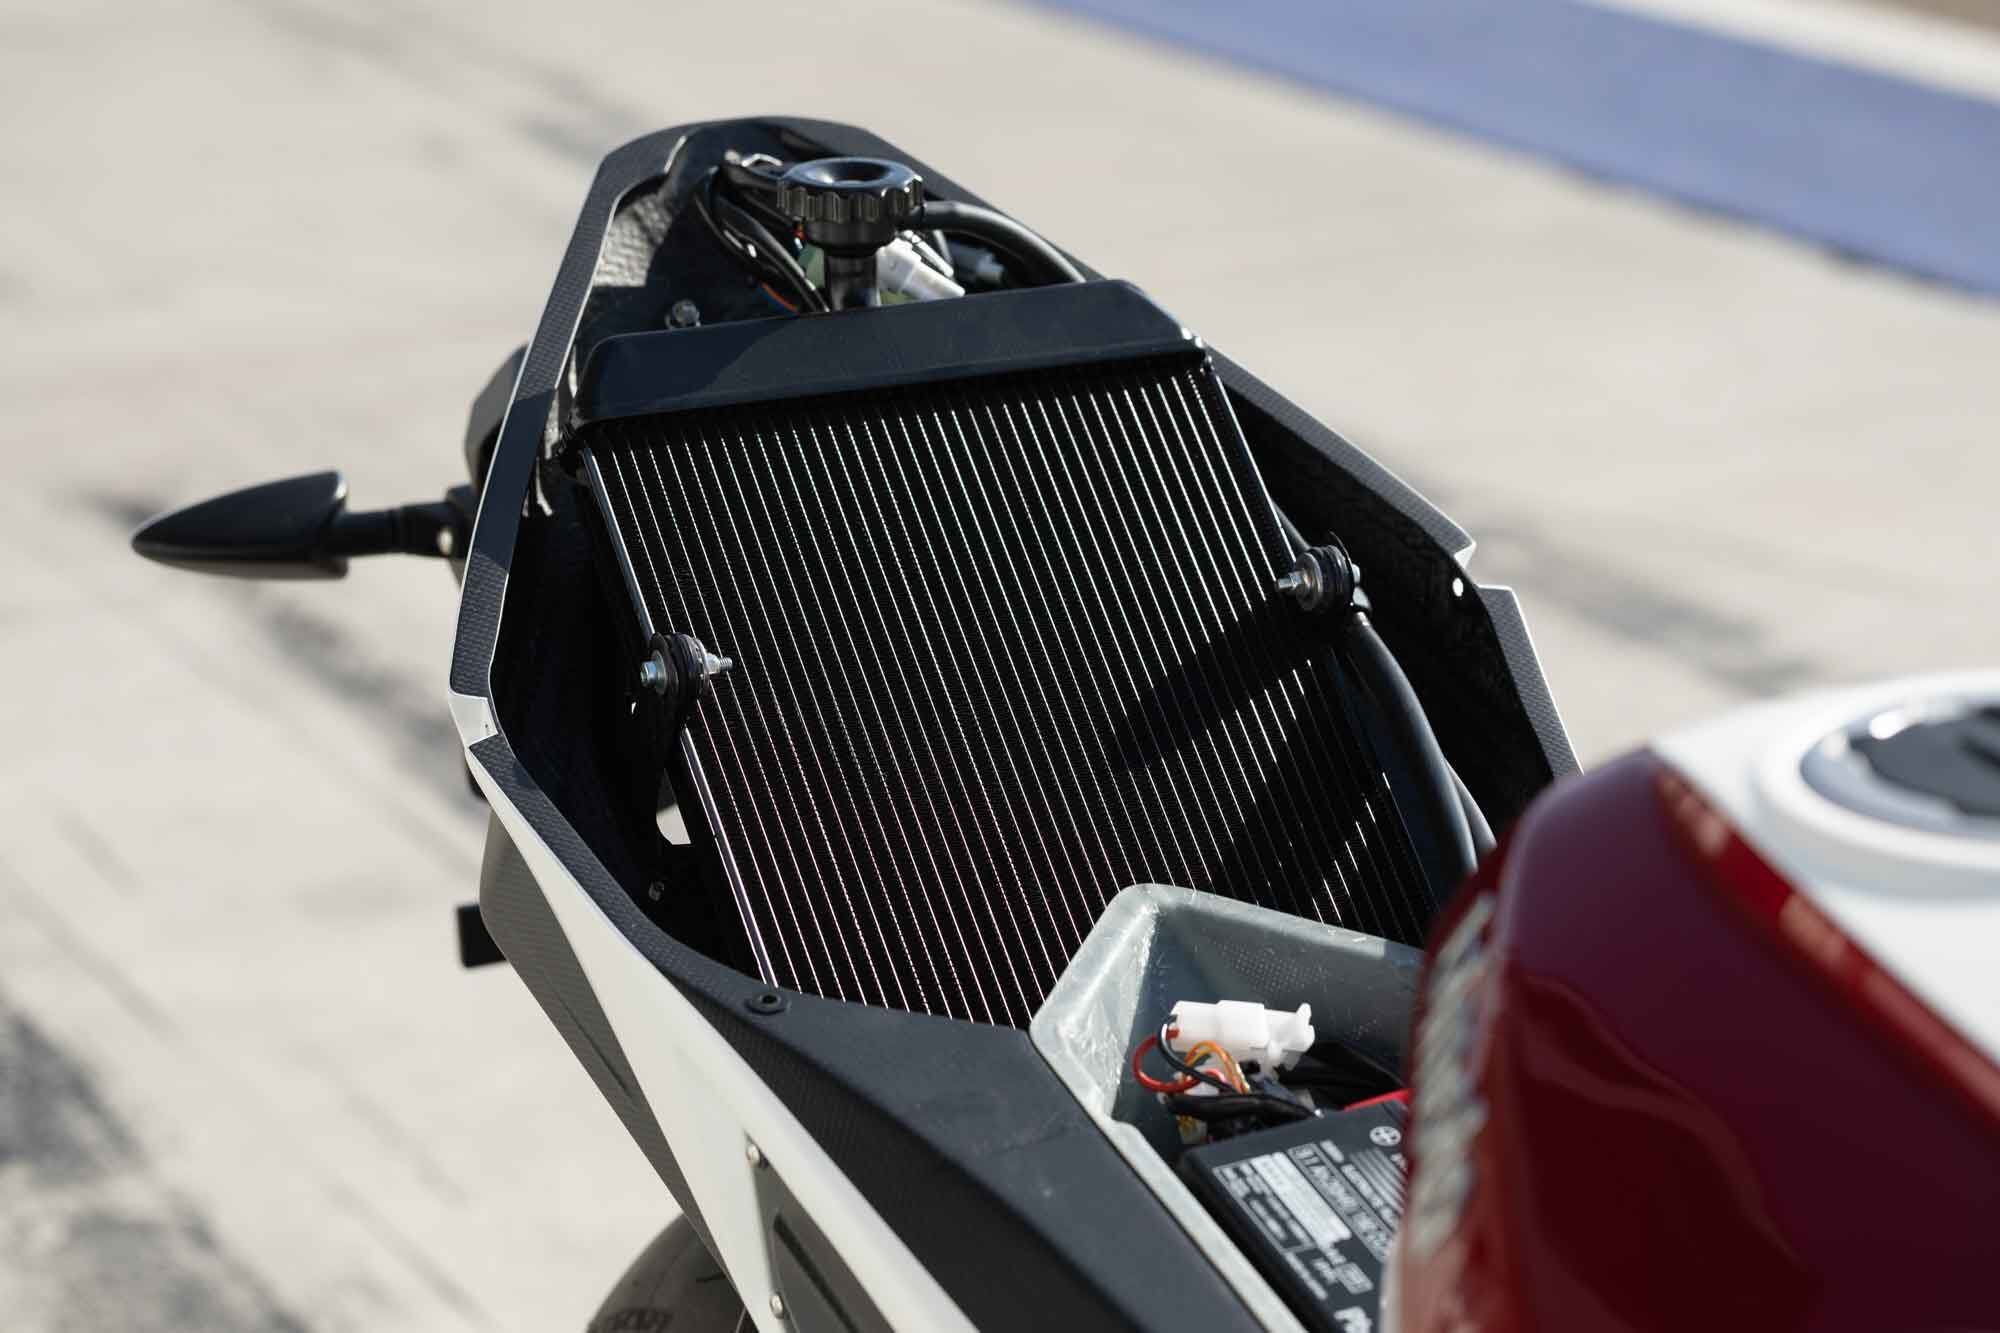 Tucked under the seat hides the KB4′s radiator.